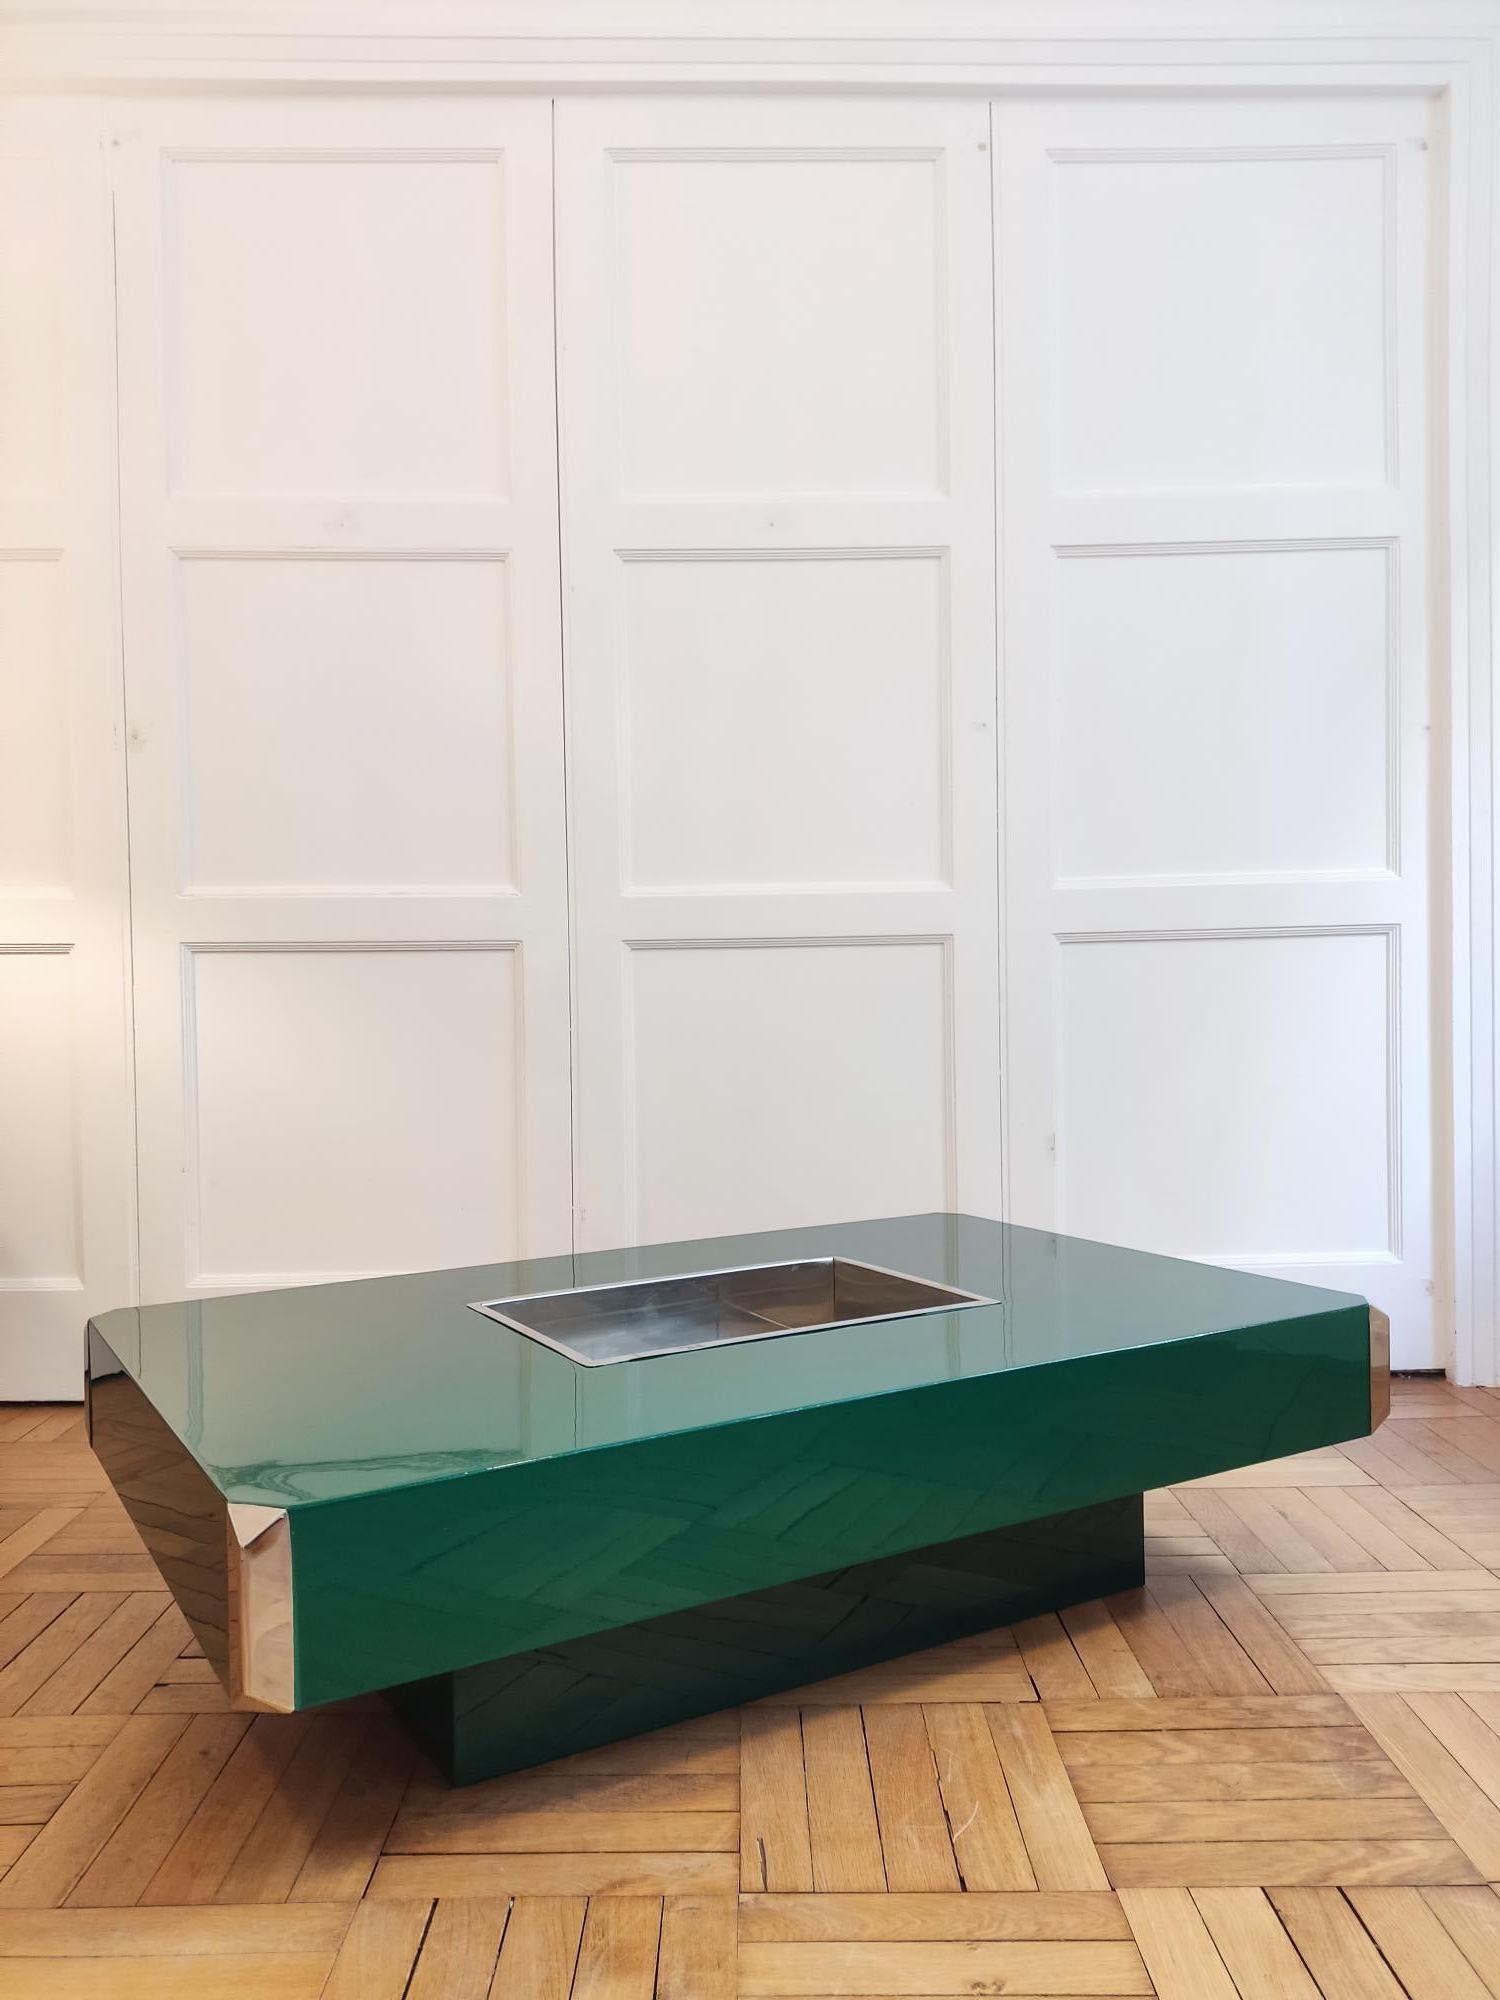 Alveo rectangular coffee table by Willy Rizzo for Mario Sabot.
Designed in the 70s, this table is recognizable by its central compartment and its chrome corner pieces. Originally the central compartment was to serve as a bar. The table has been